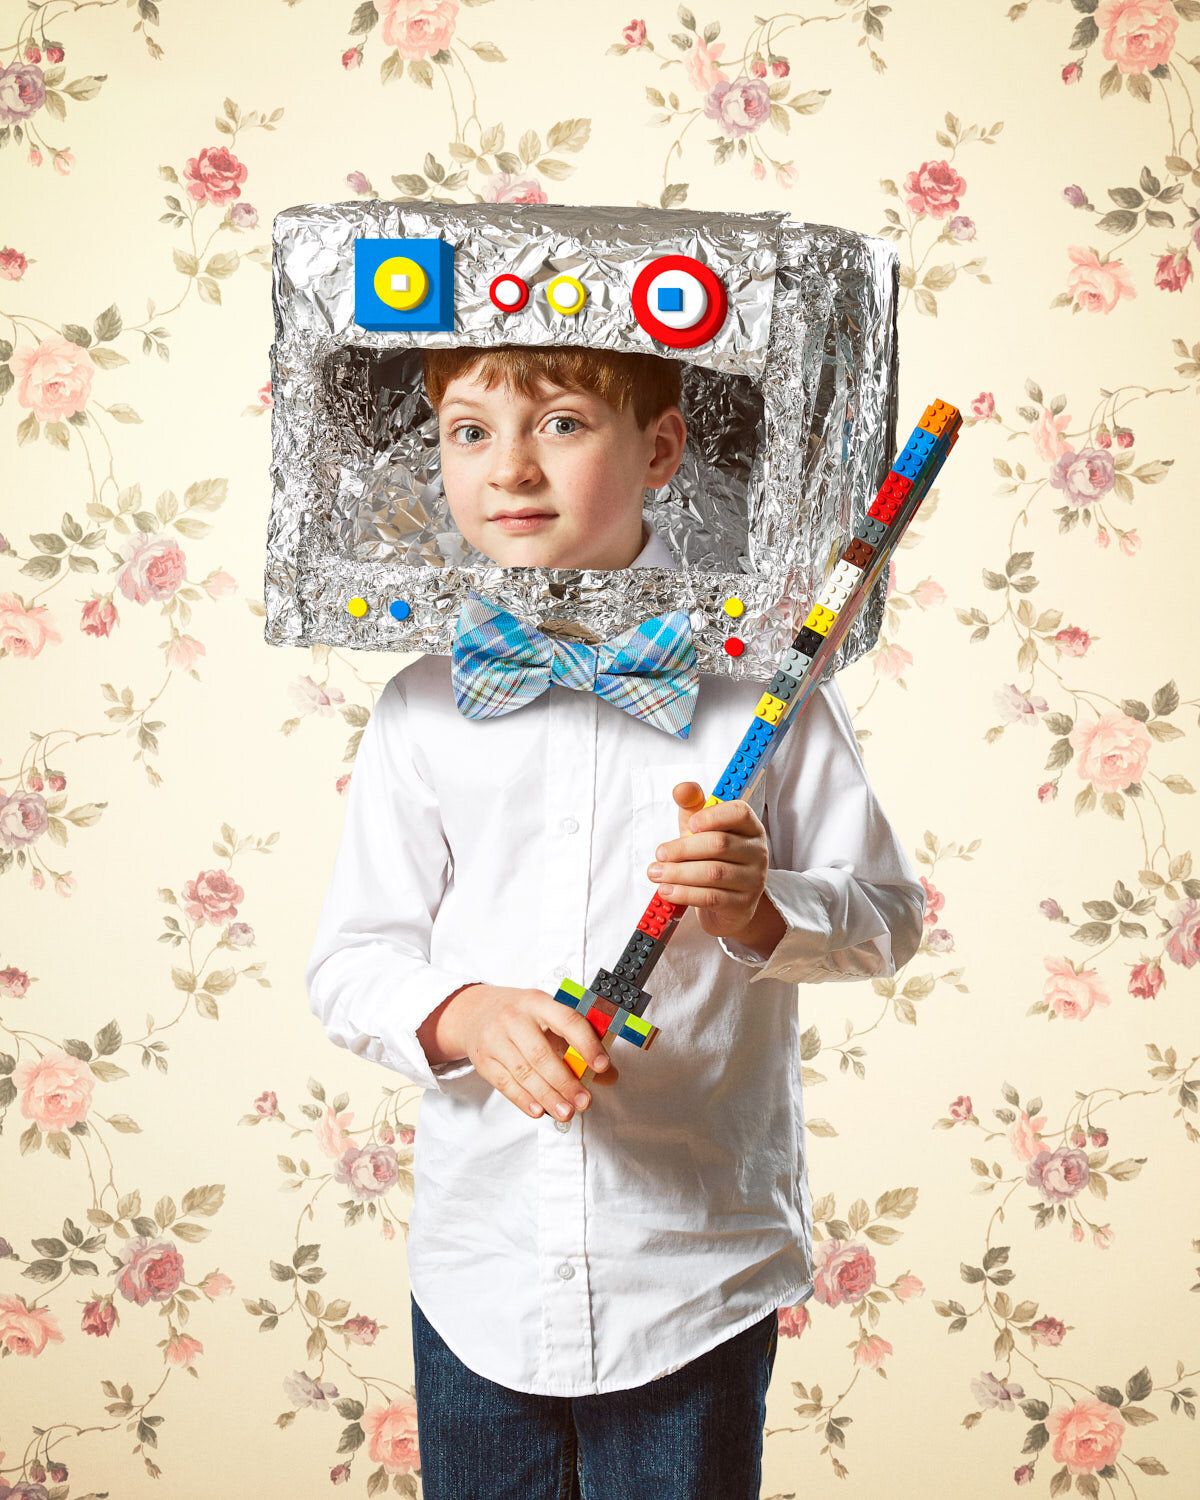 child with homemade robot head, giant bowtie, and lego sword with vintage floral wallpaper by creative portrait photographer Hanna Agar